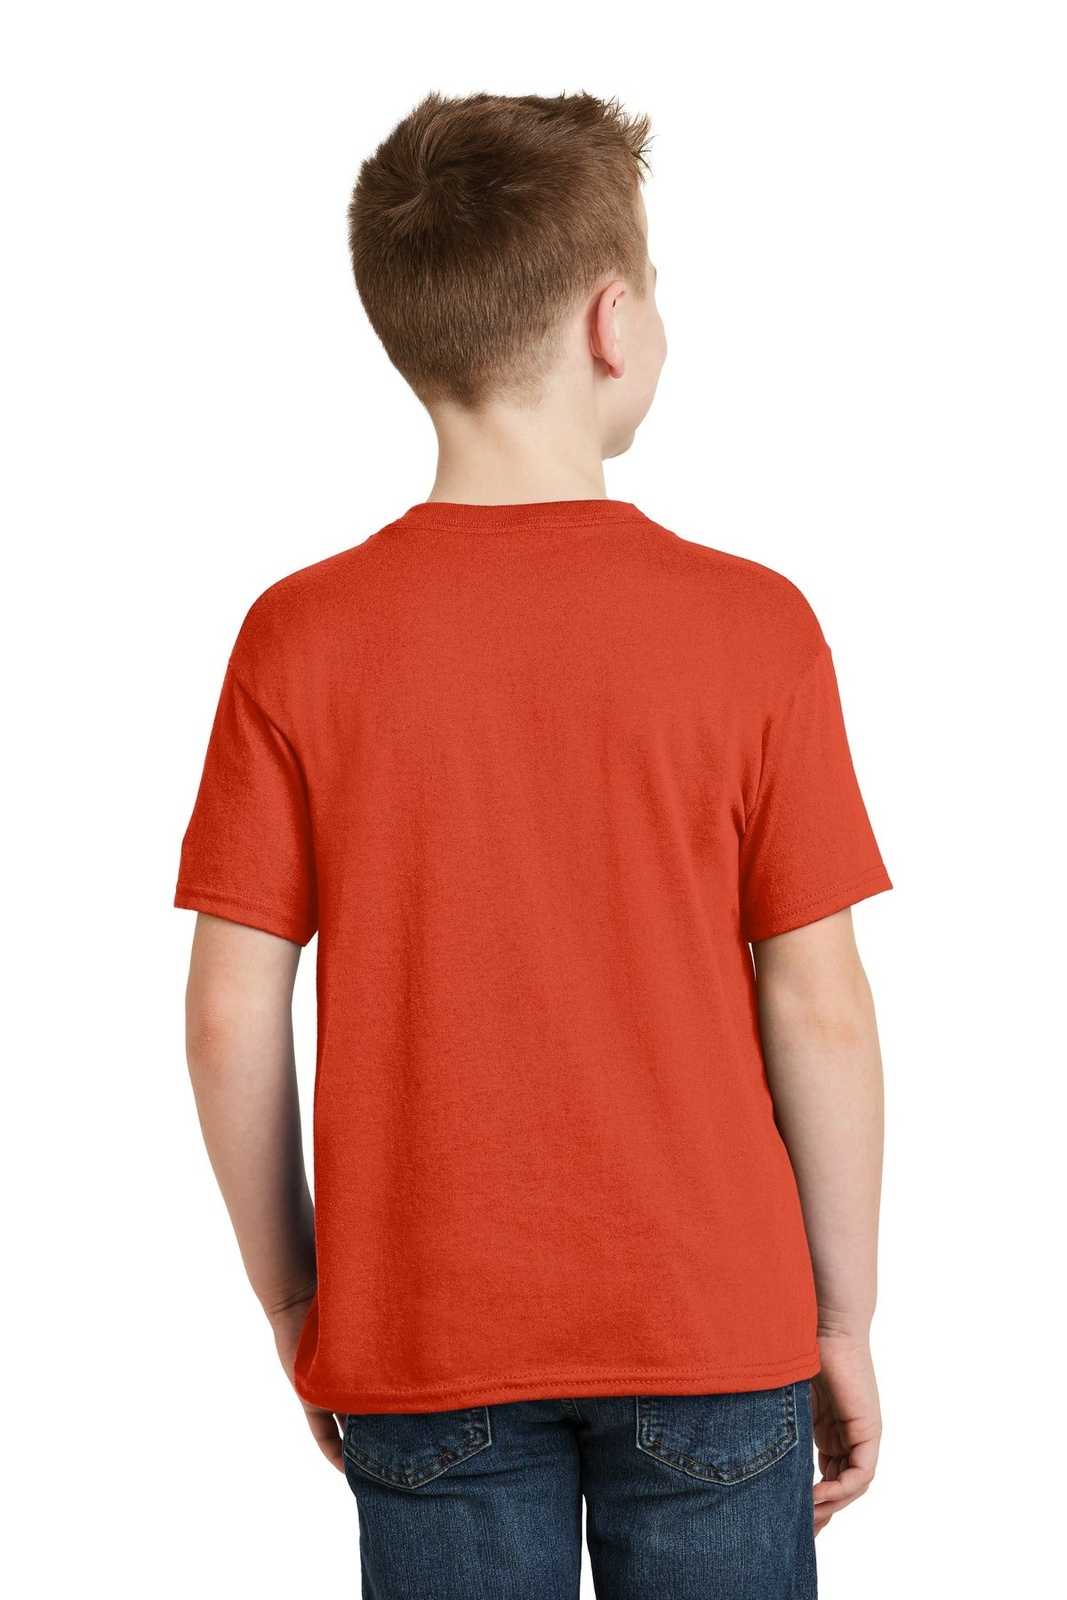 Hanes 5370 Youth Ecosmart 50/50 Cotton/Poly T-Shirt - Orange - HIT a Double